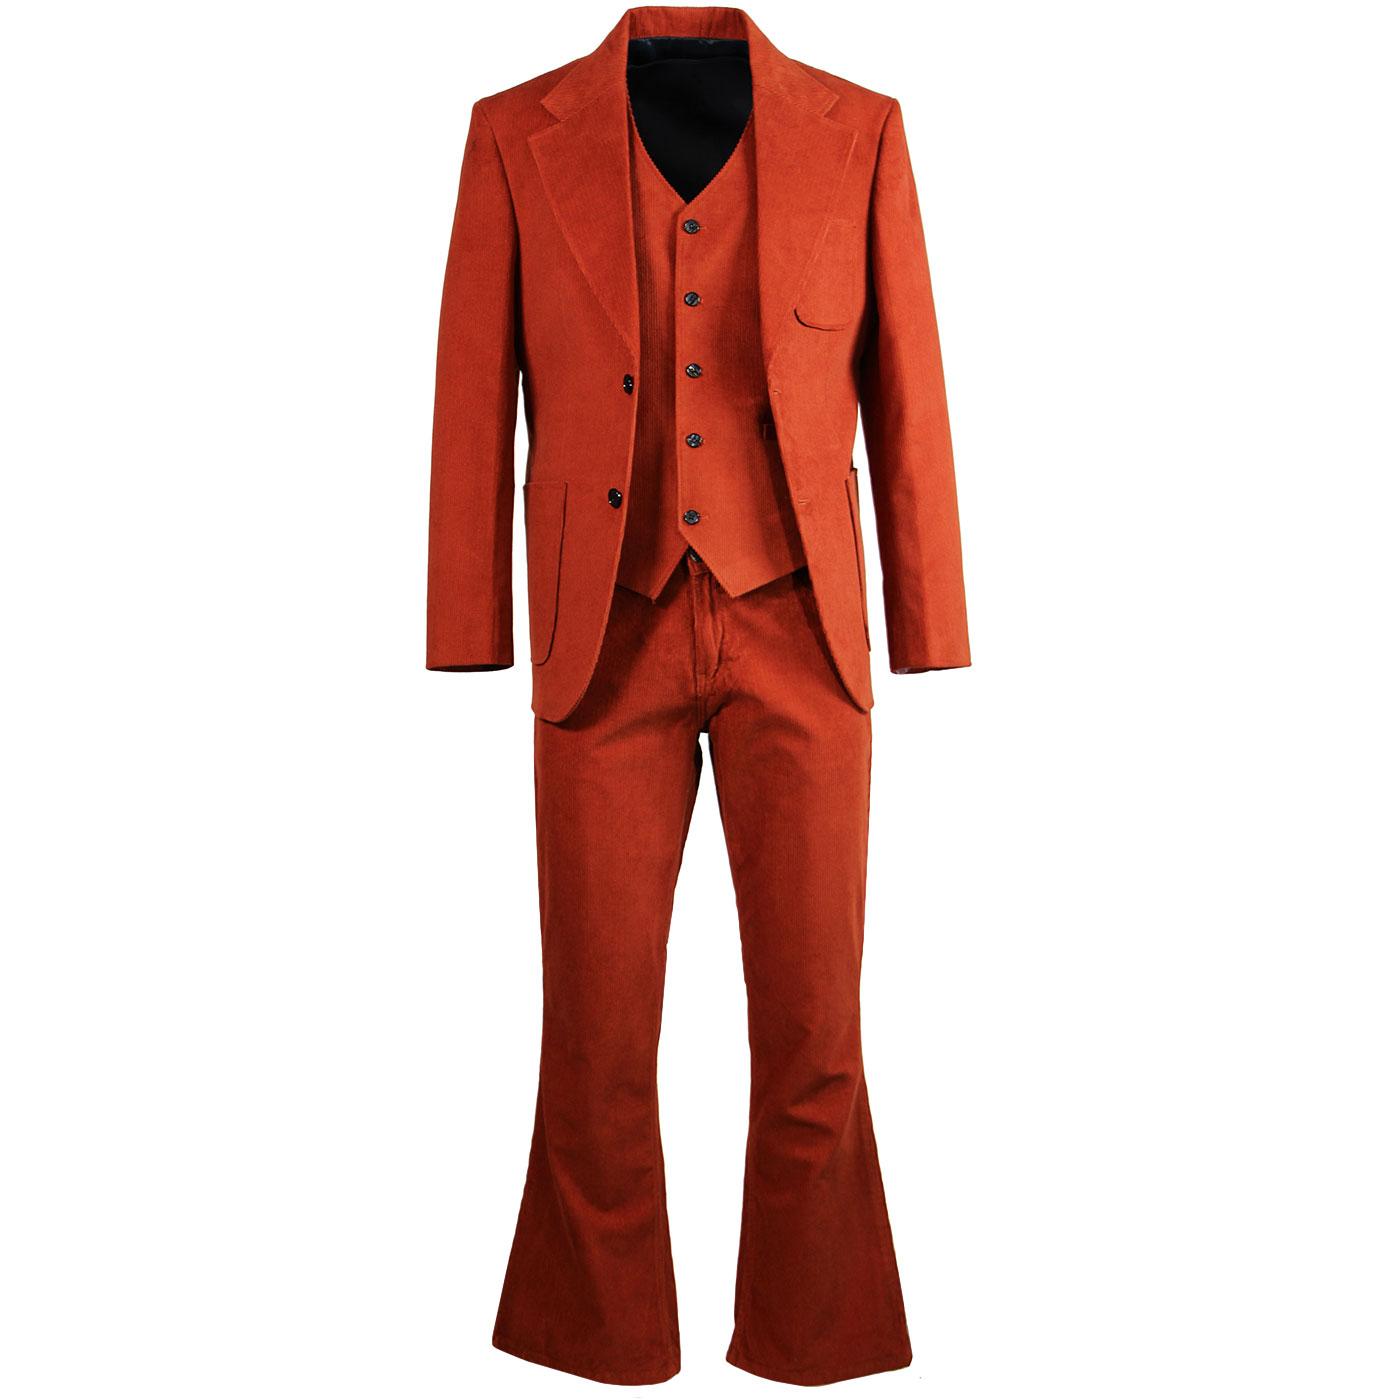 Montana MADCAP ENGLAND 70s Flared Cord Suit - Rust